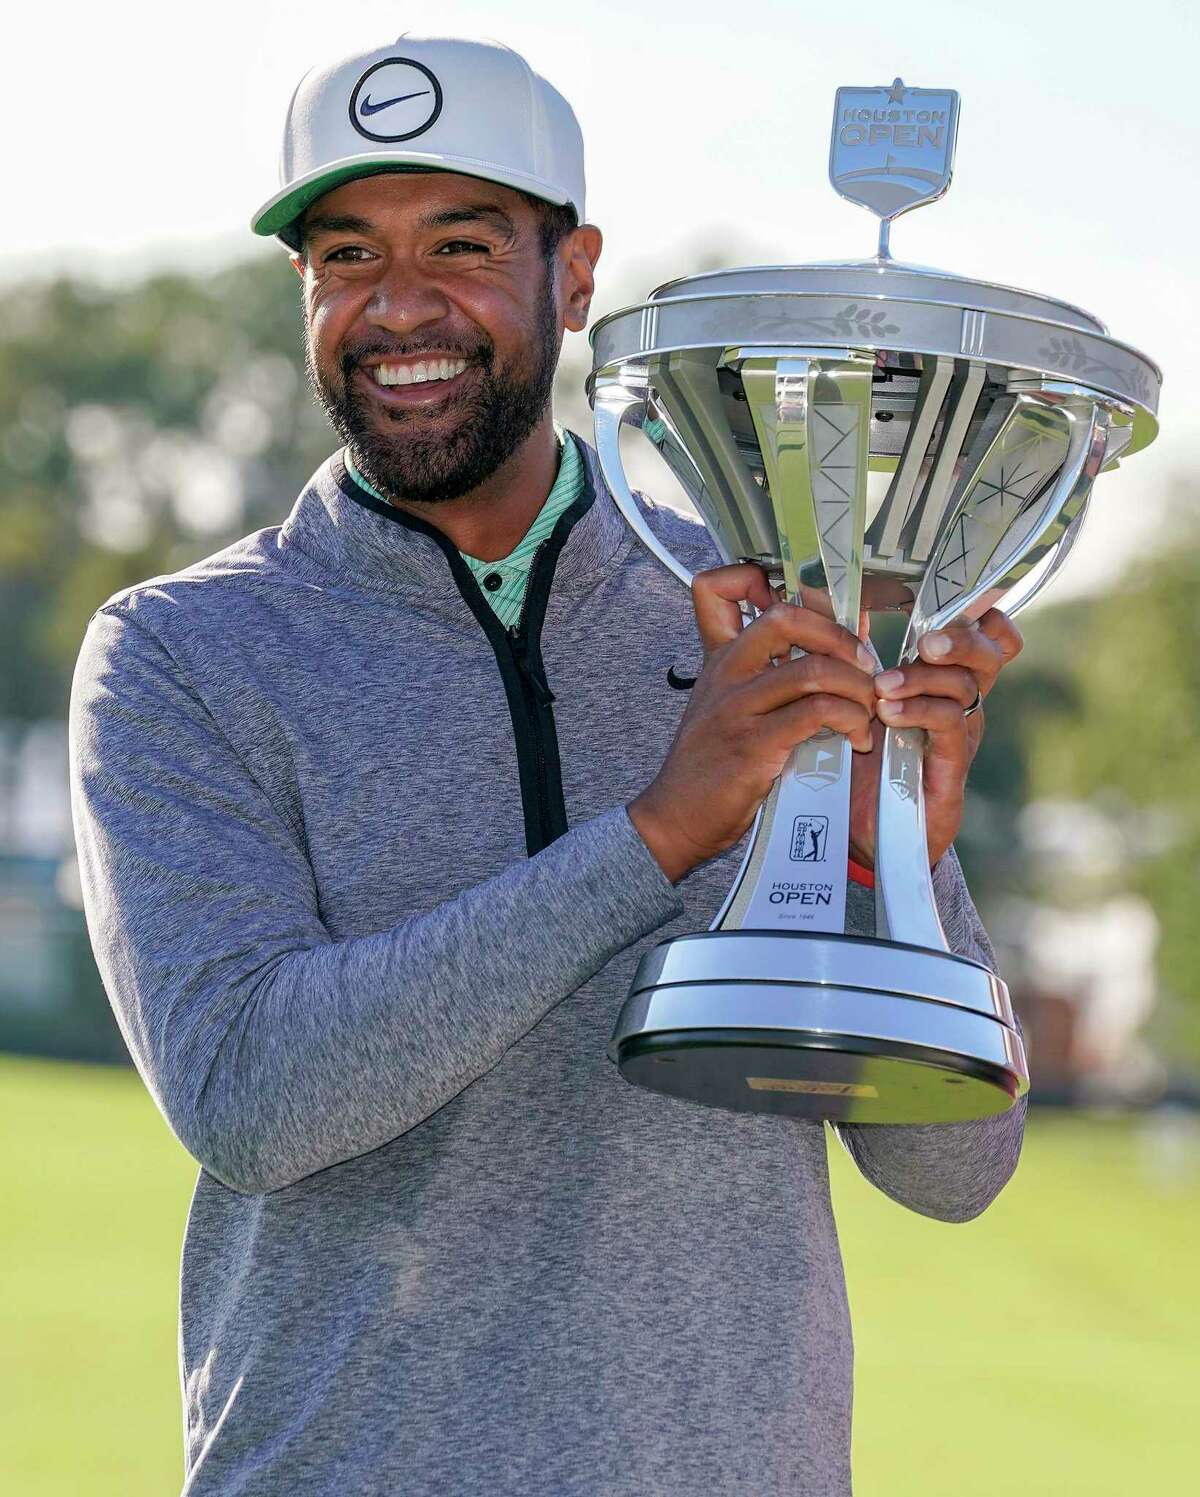 Tony Finau holds the champions’ trophy after winning the Houston Open golf tournament, Sunday, Nov. 13, 2022, in Houston.